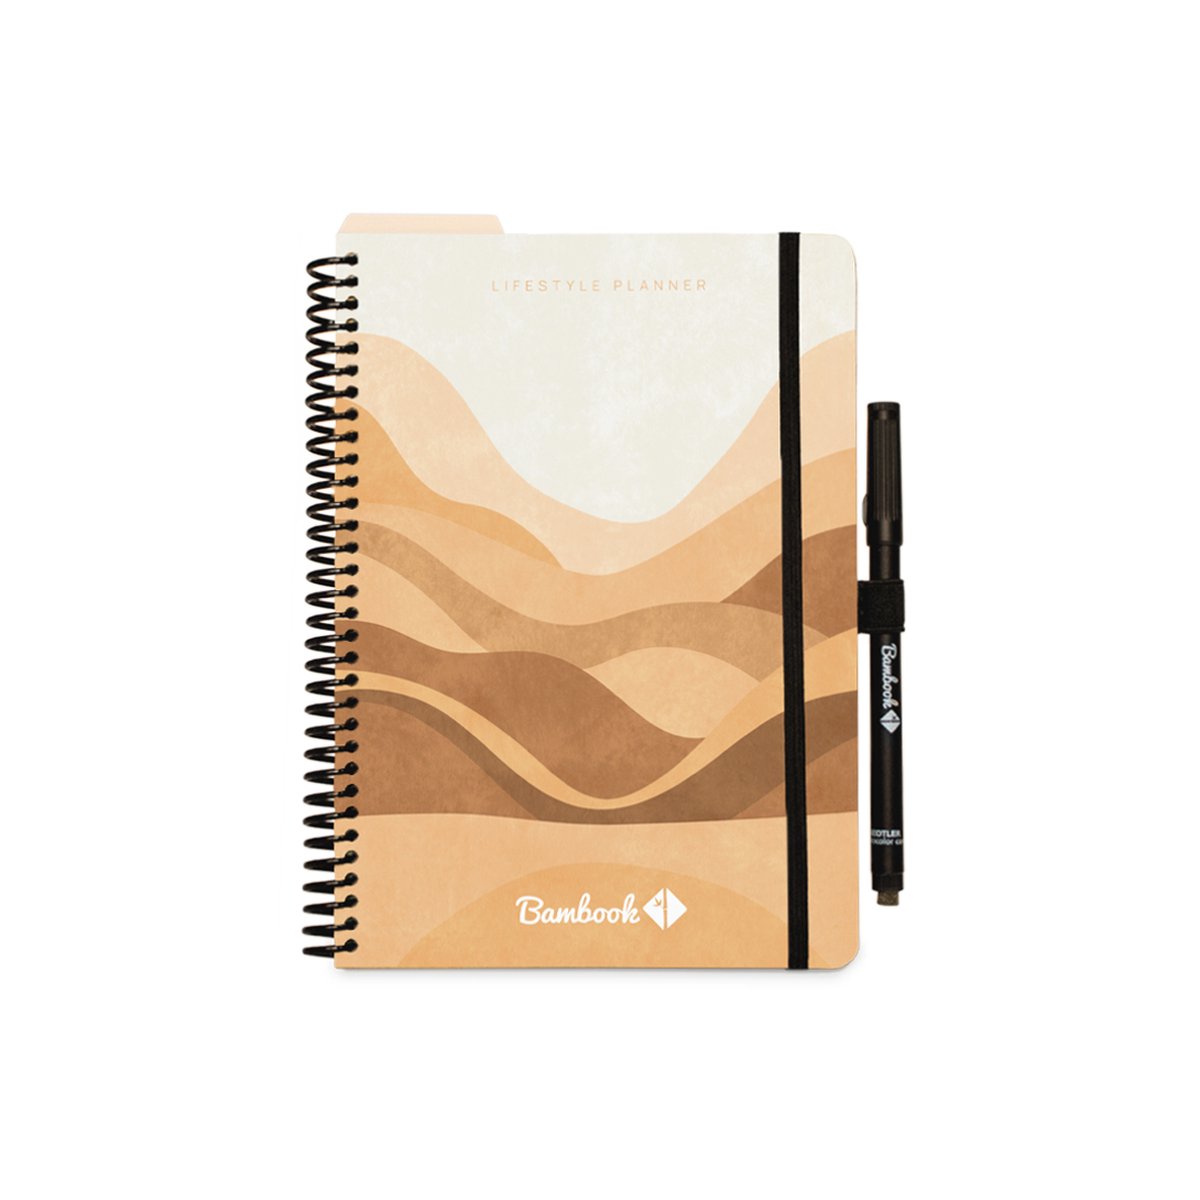 Bambook Lifestyle Planner - Softcover - A5 - Met 1 gratis stift